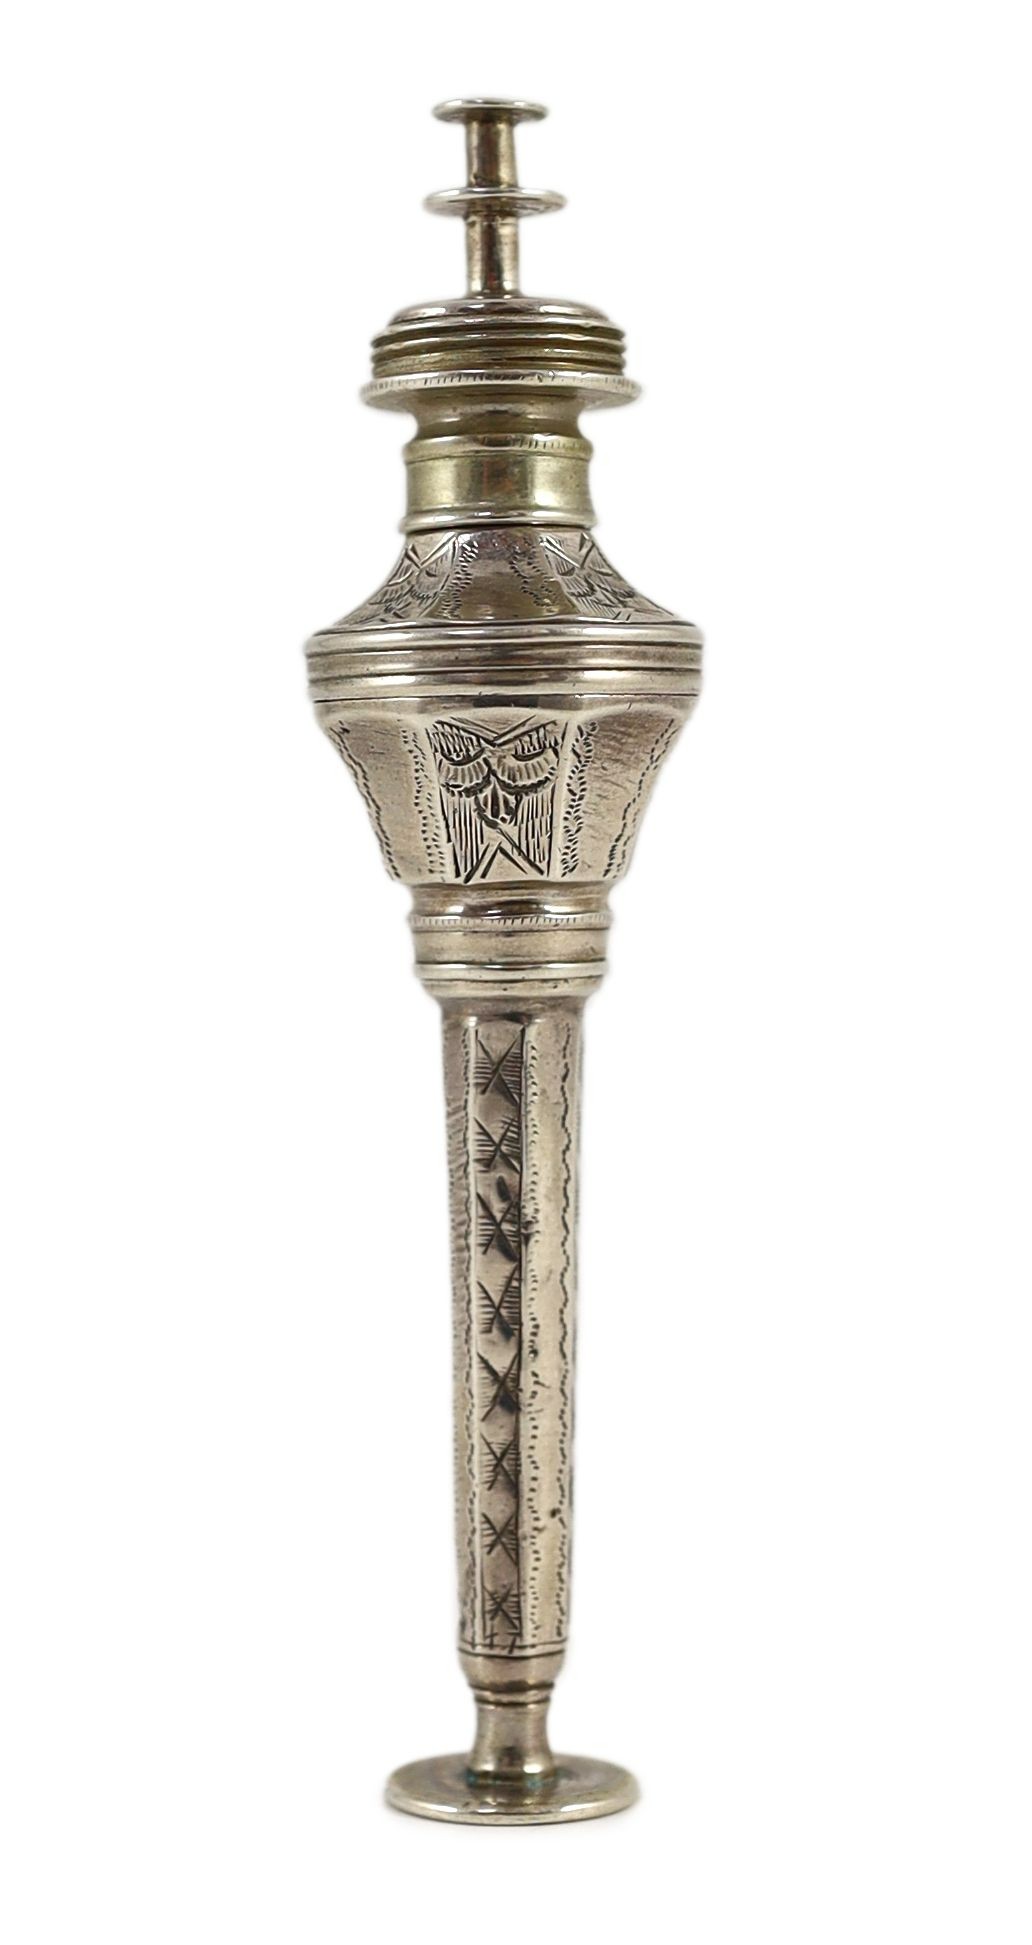 An unusual 19th century silver seal?, of mace form, in three sections, with engraved decoration